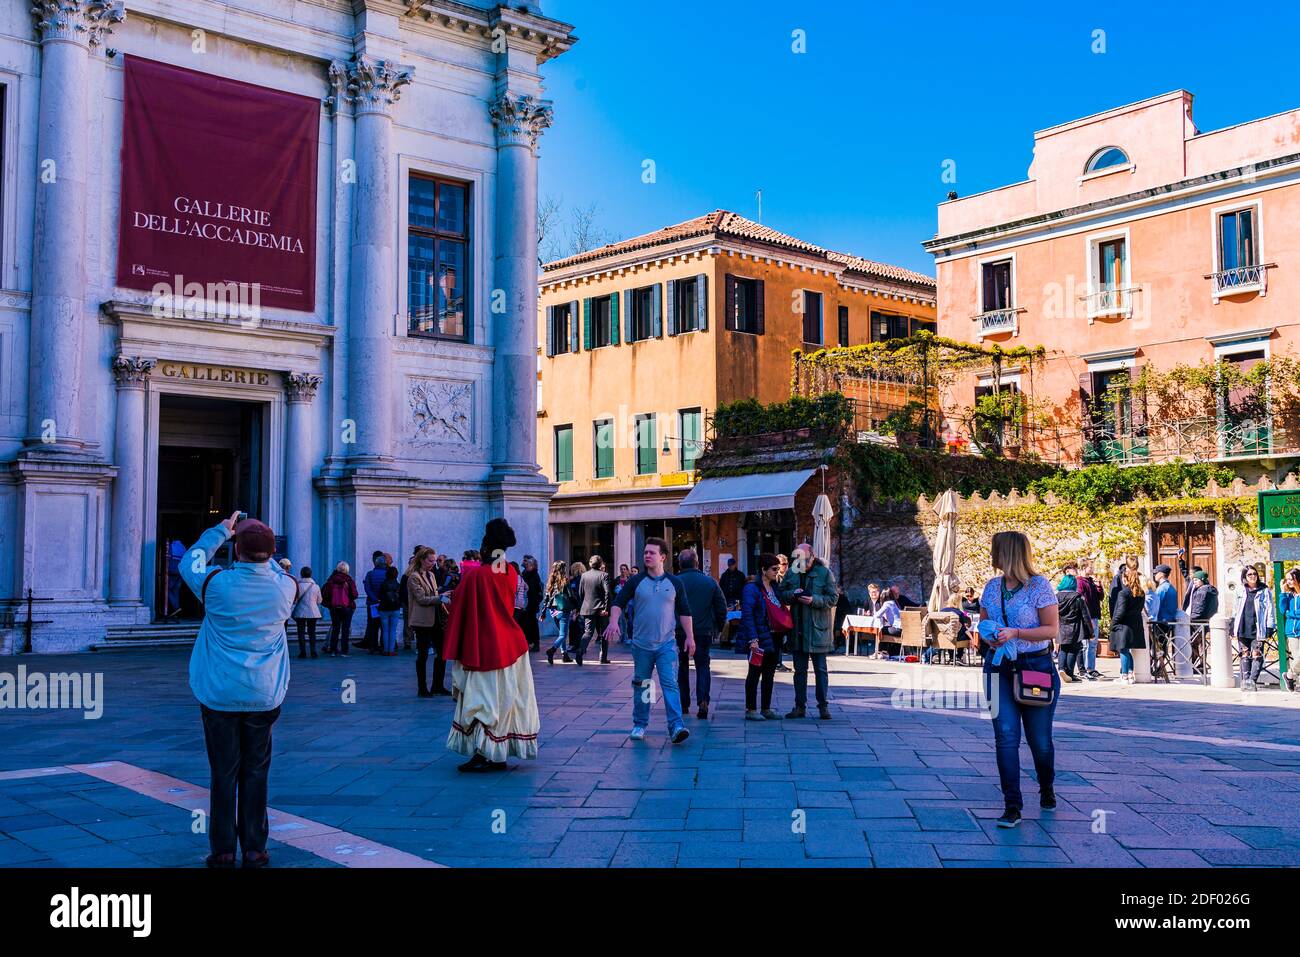 The Gallerie dell'Accademia is a museum gallery of pre-19th-century art in Venice.It is housed in the Scuola della Carità on the south bank of the Gra Stock Photo